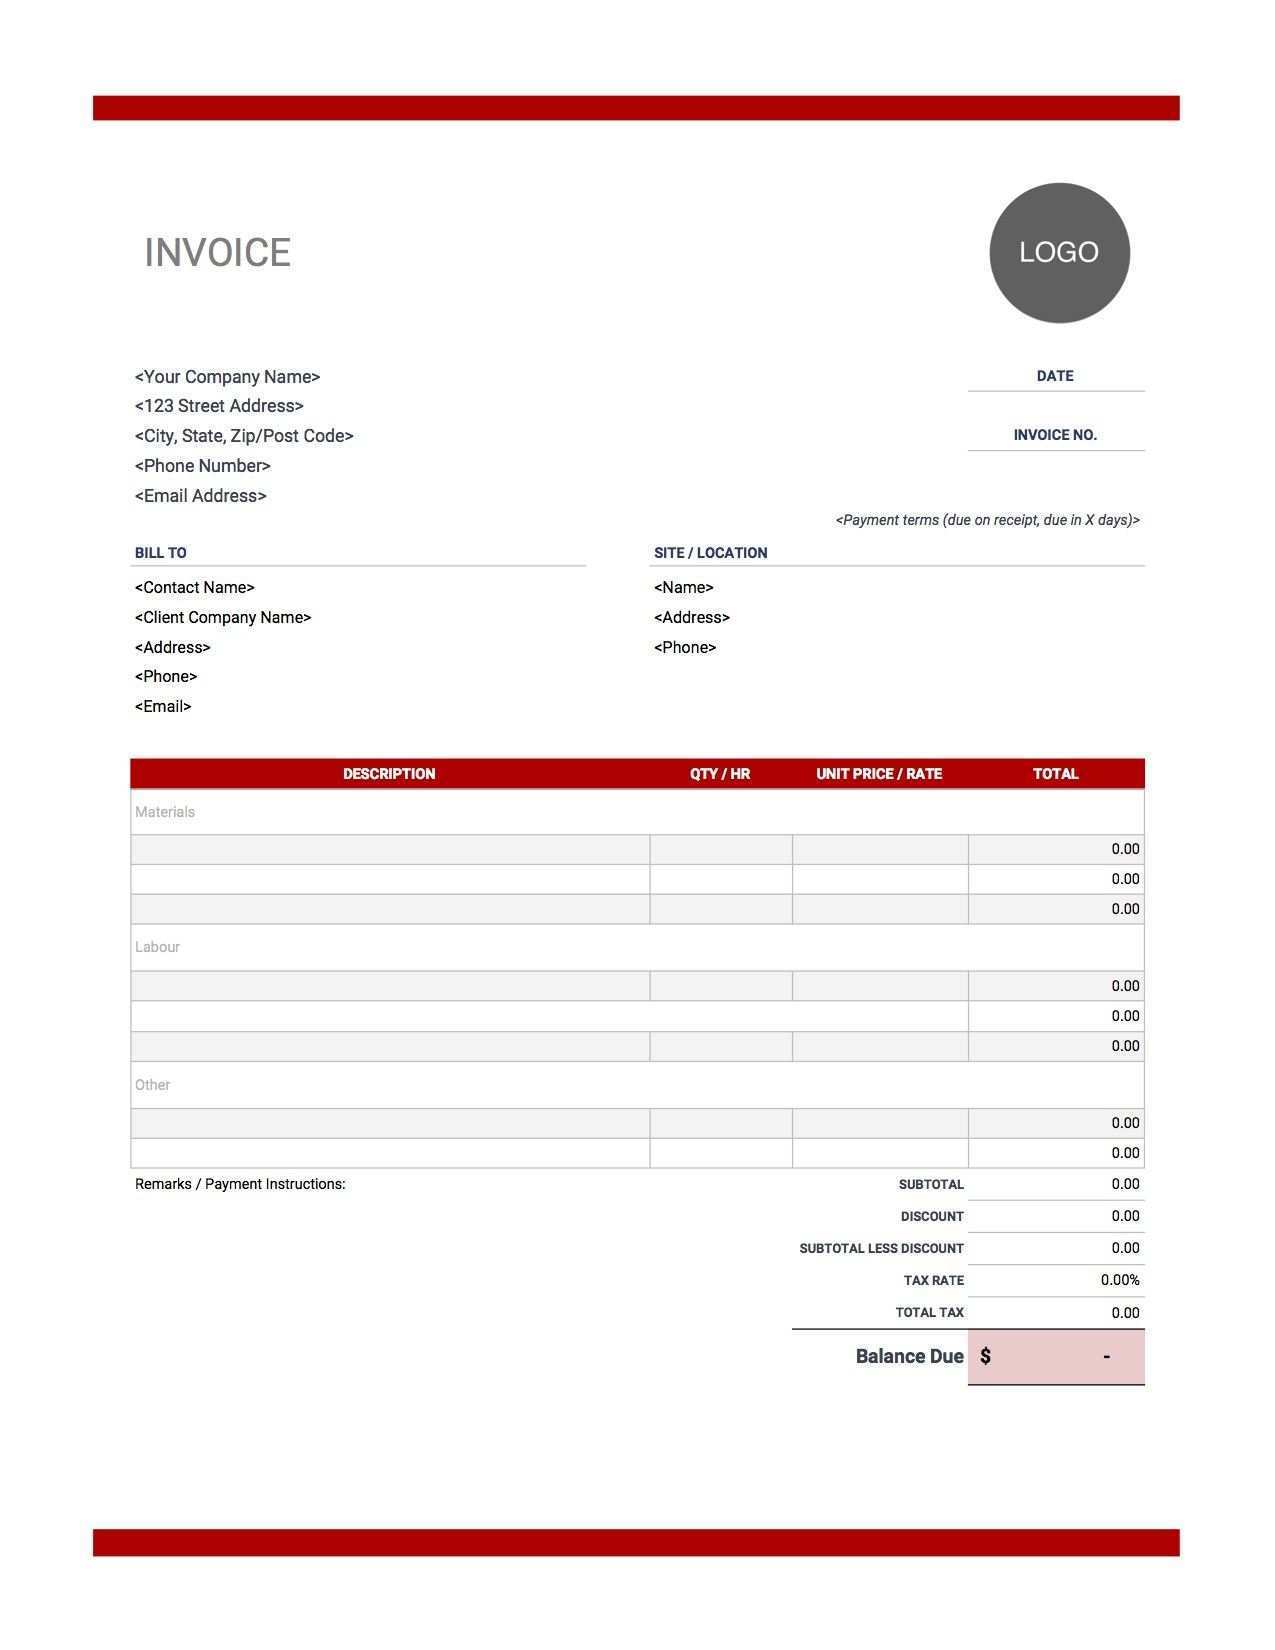 45 Report Invoice Template For A Contractor For Free with Invoice Template For A Contractor